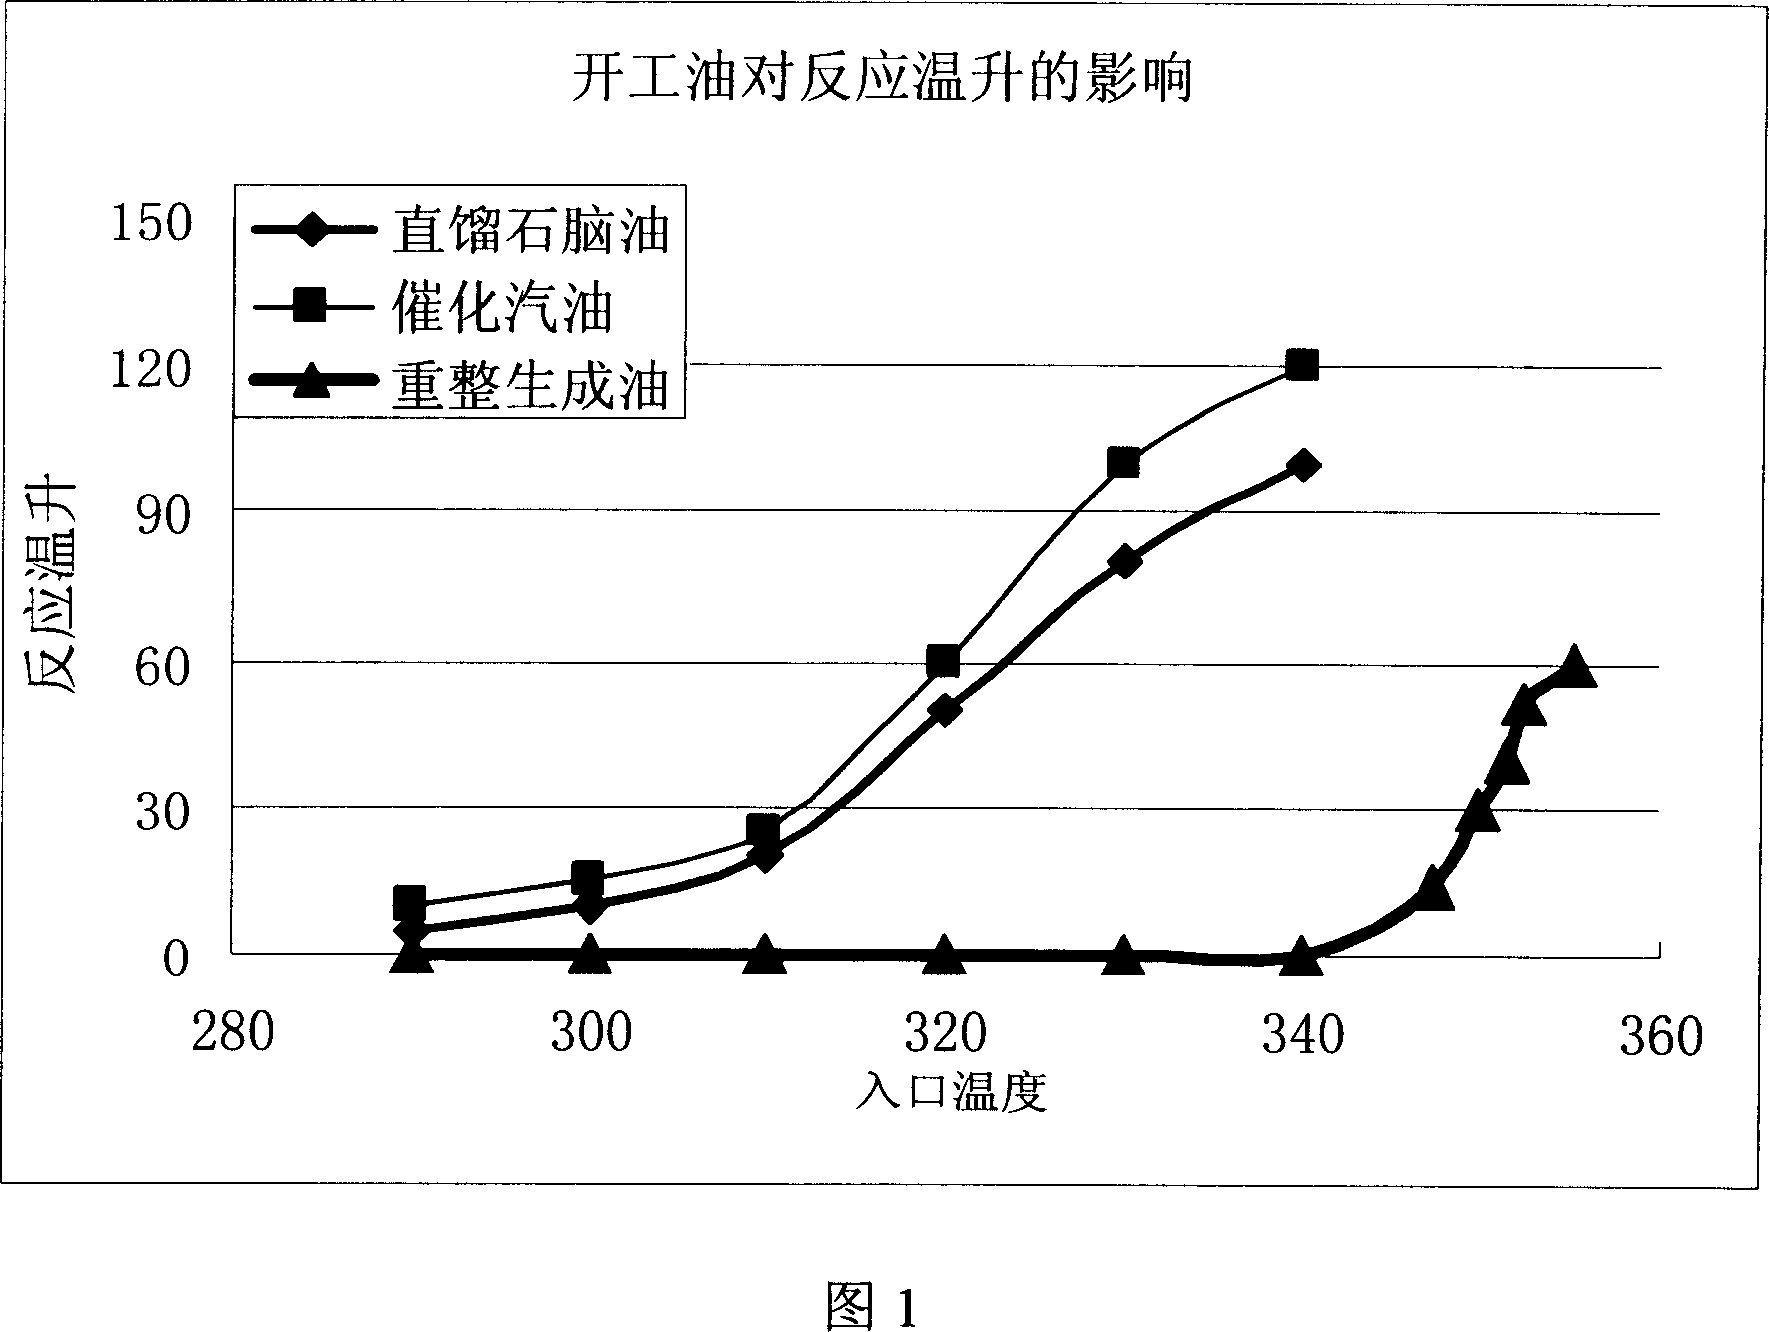 Method for FCC gasoline proceeding hydrodesulphurization and olefin removal